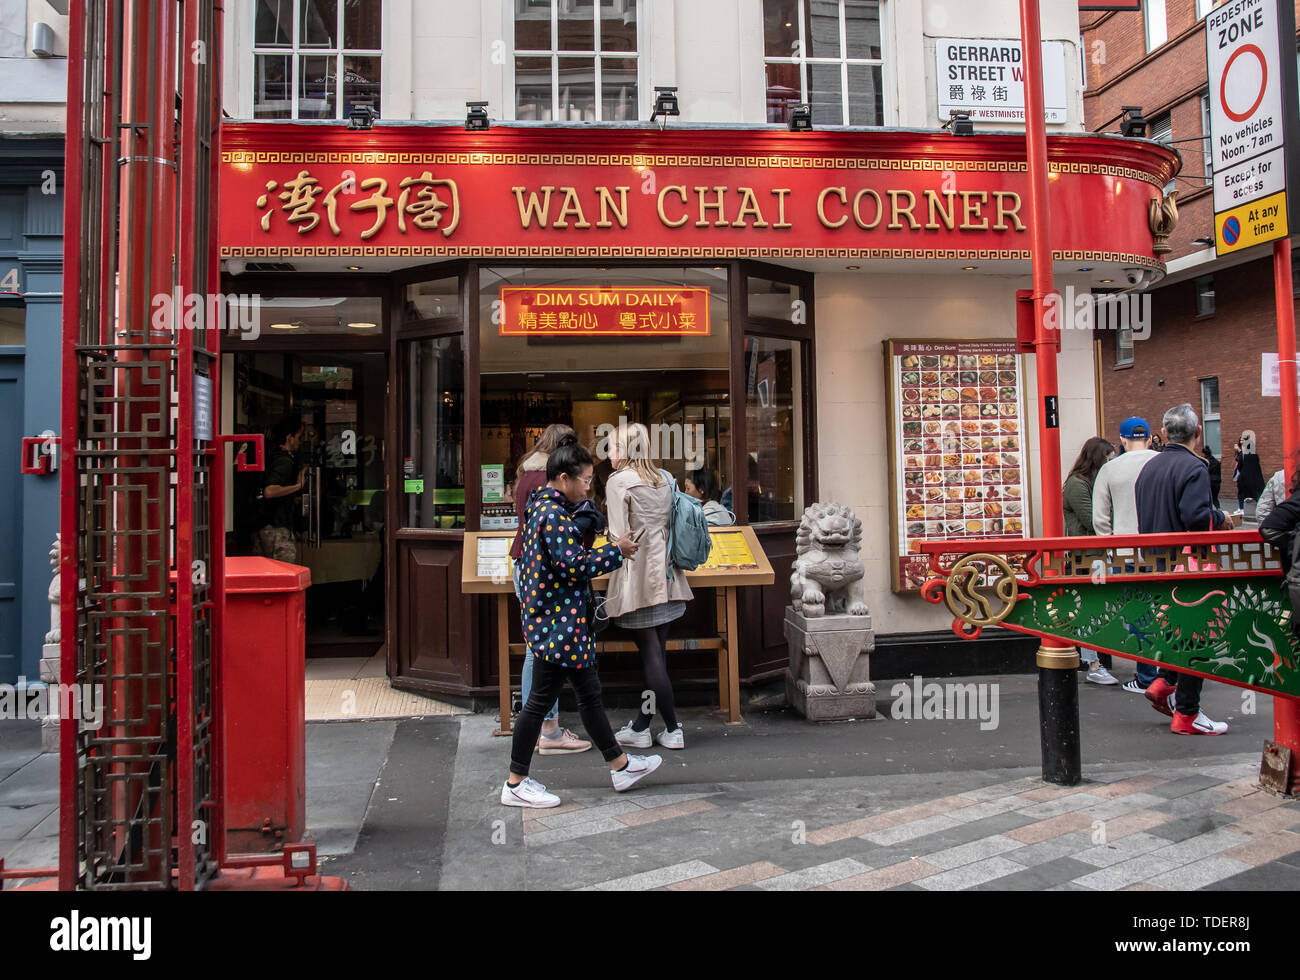 London, UK. London, UK. Wan Chai Corner in London Chinatown Sweet Tooth Cafe and Restaurant at Newport Court and Garret Street on 15 June 2019, UK. Credit: Picture Capital/Alamy Live News Credit: Picture Capital/Alamy Live News Stock Photo